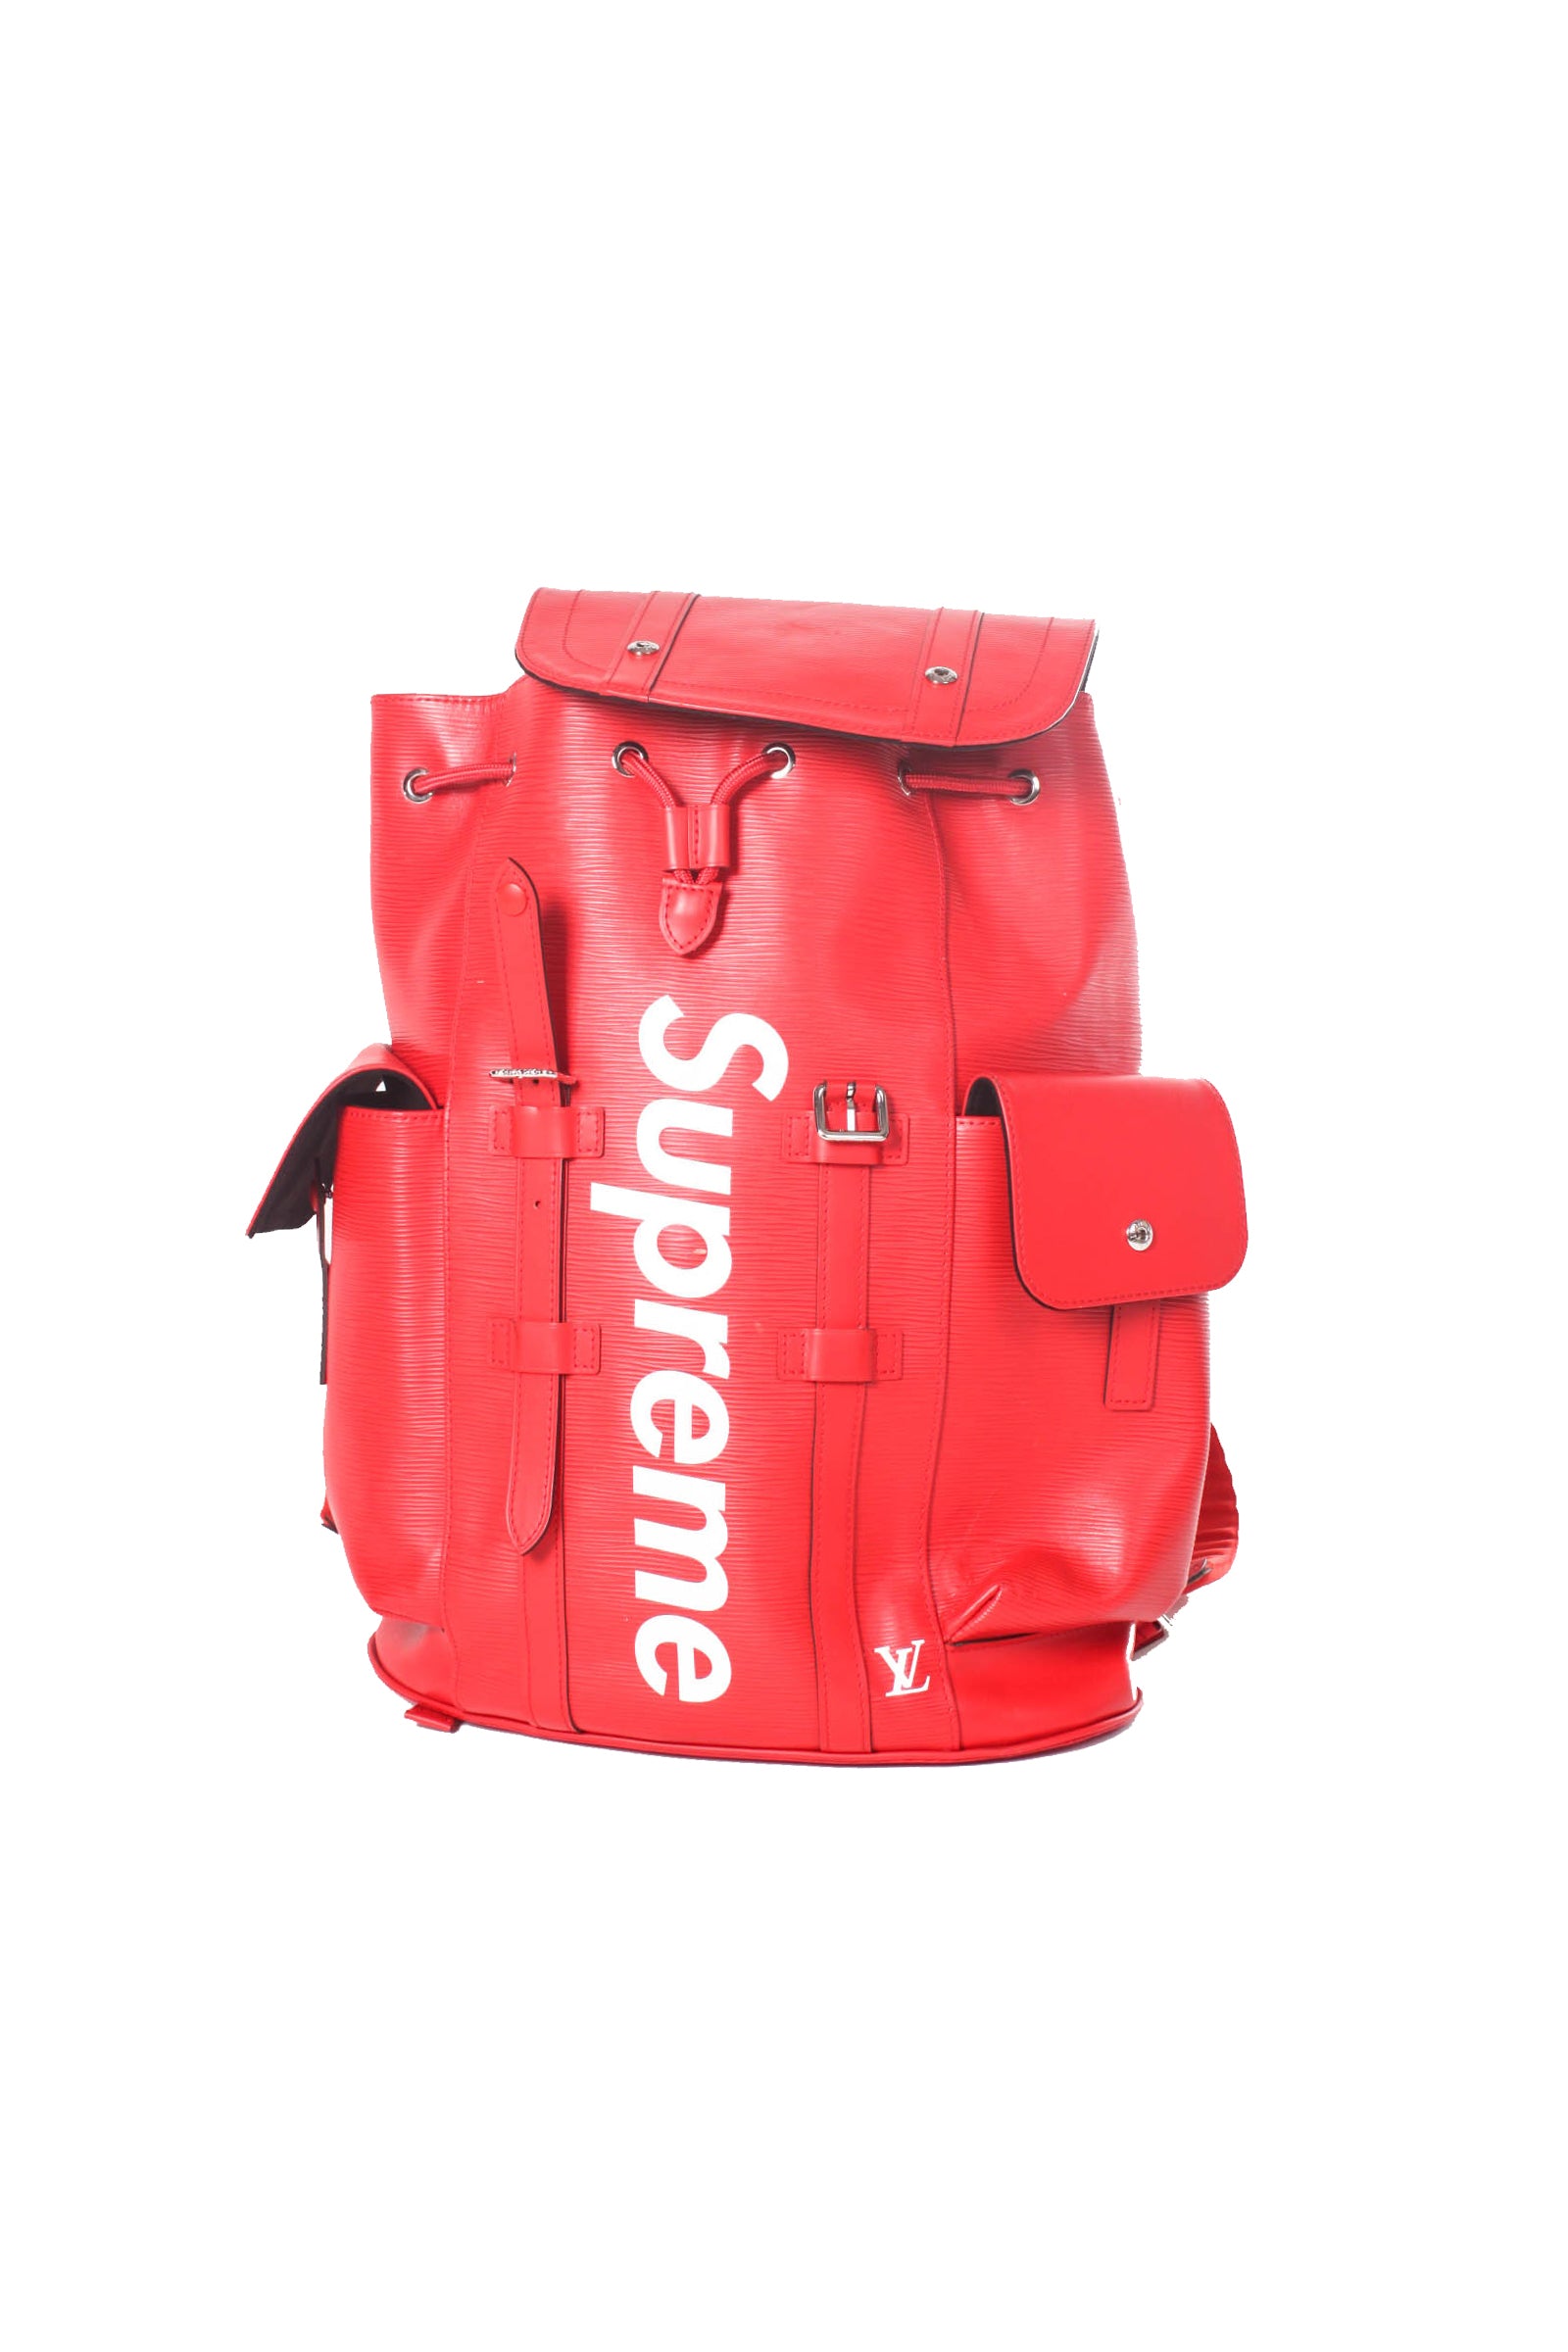 Supreme X Louis Vuitton Backpack – Swaggys Closet